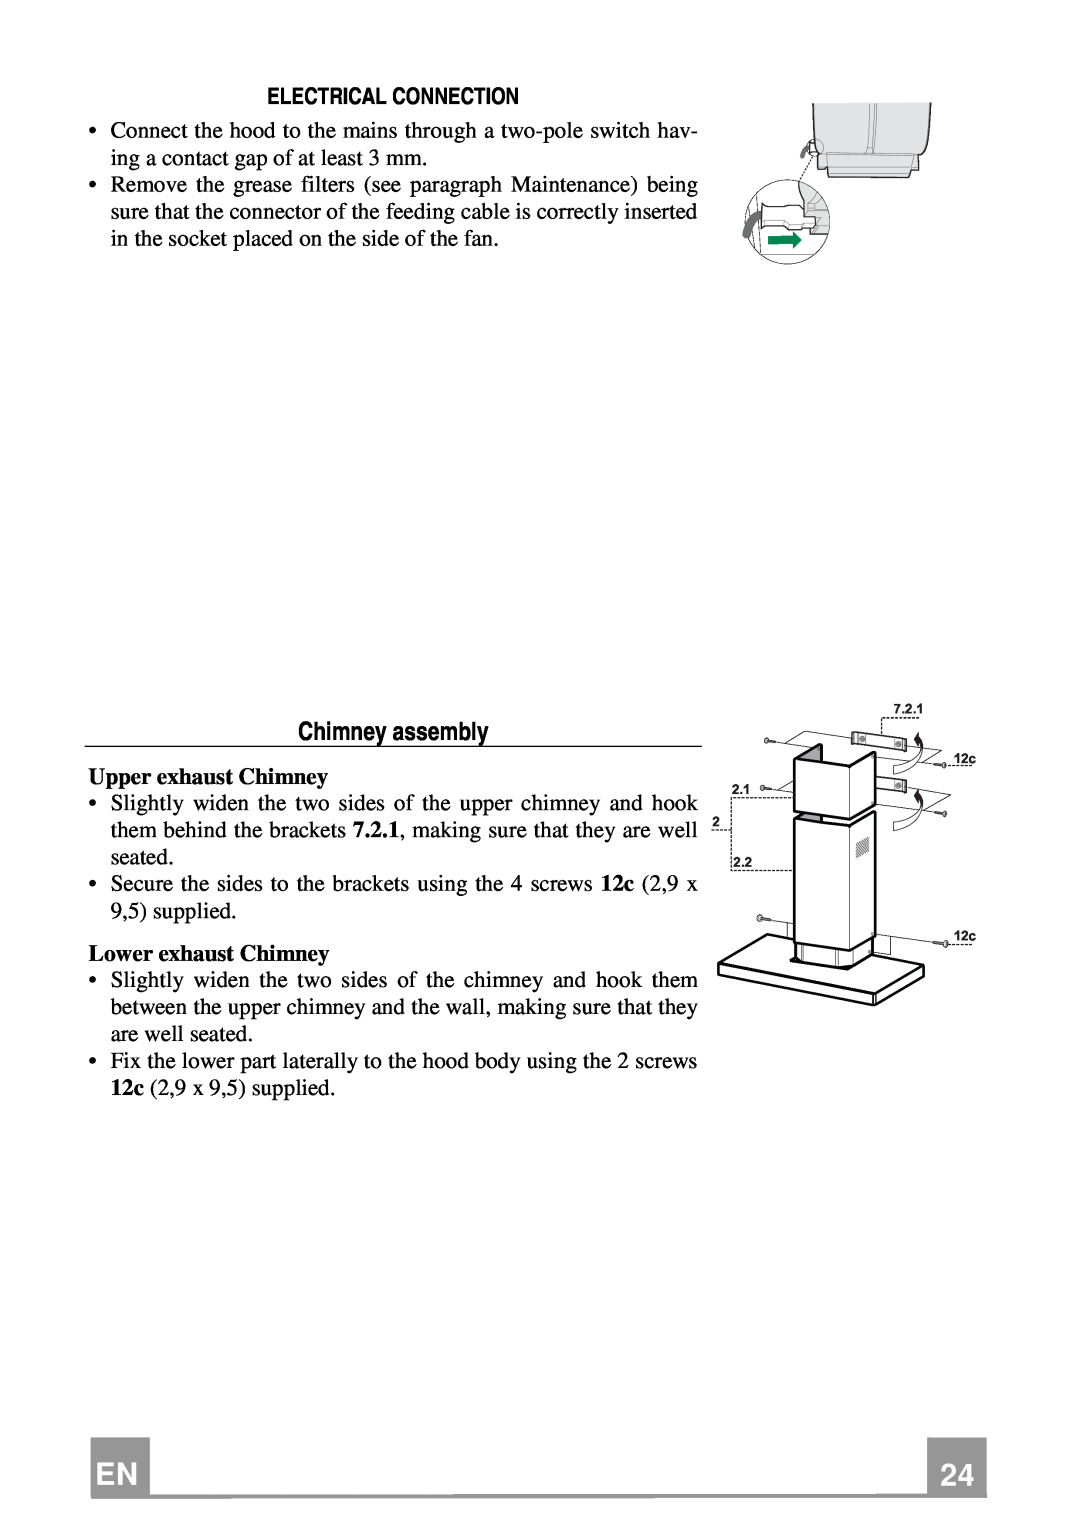 Smeg KSE912NX manual Chimney assembly, Electrical Connection, Upper exhaust Chimney, Lower exhaust Chimney, seated 